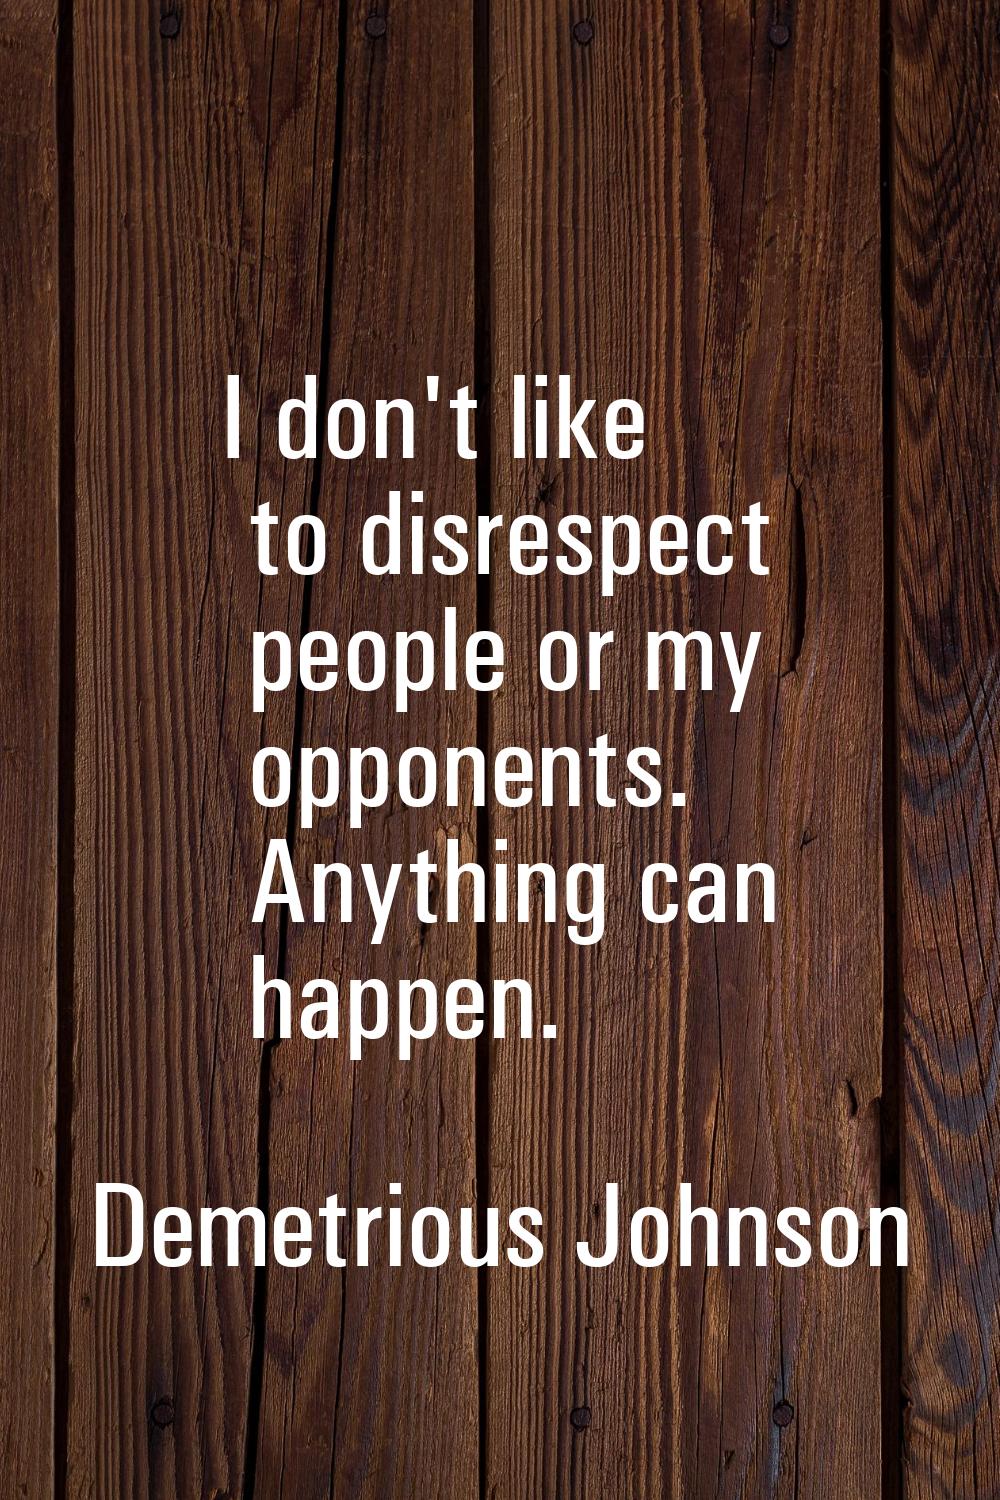 I don't like to disrespect people or my opponents. Anything can happen.